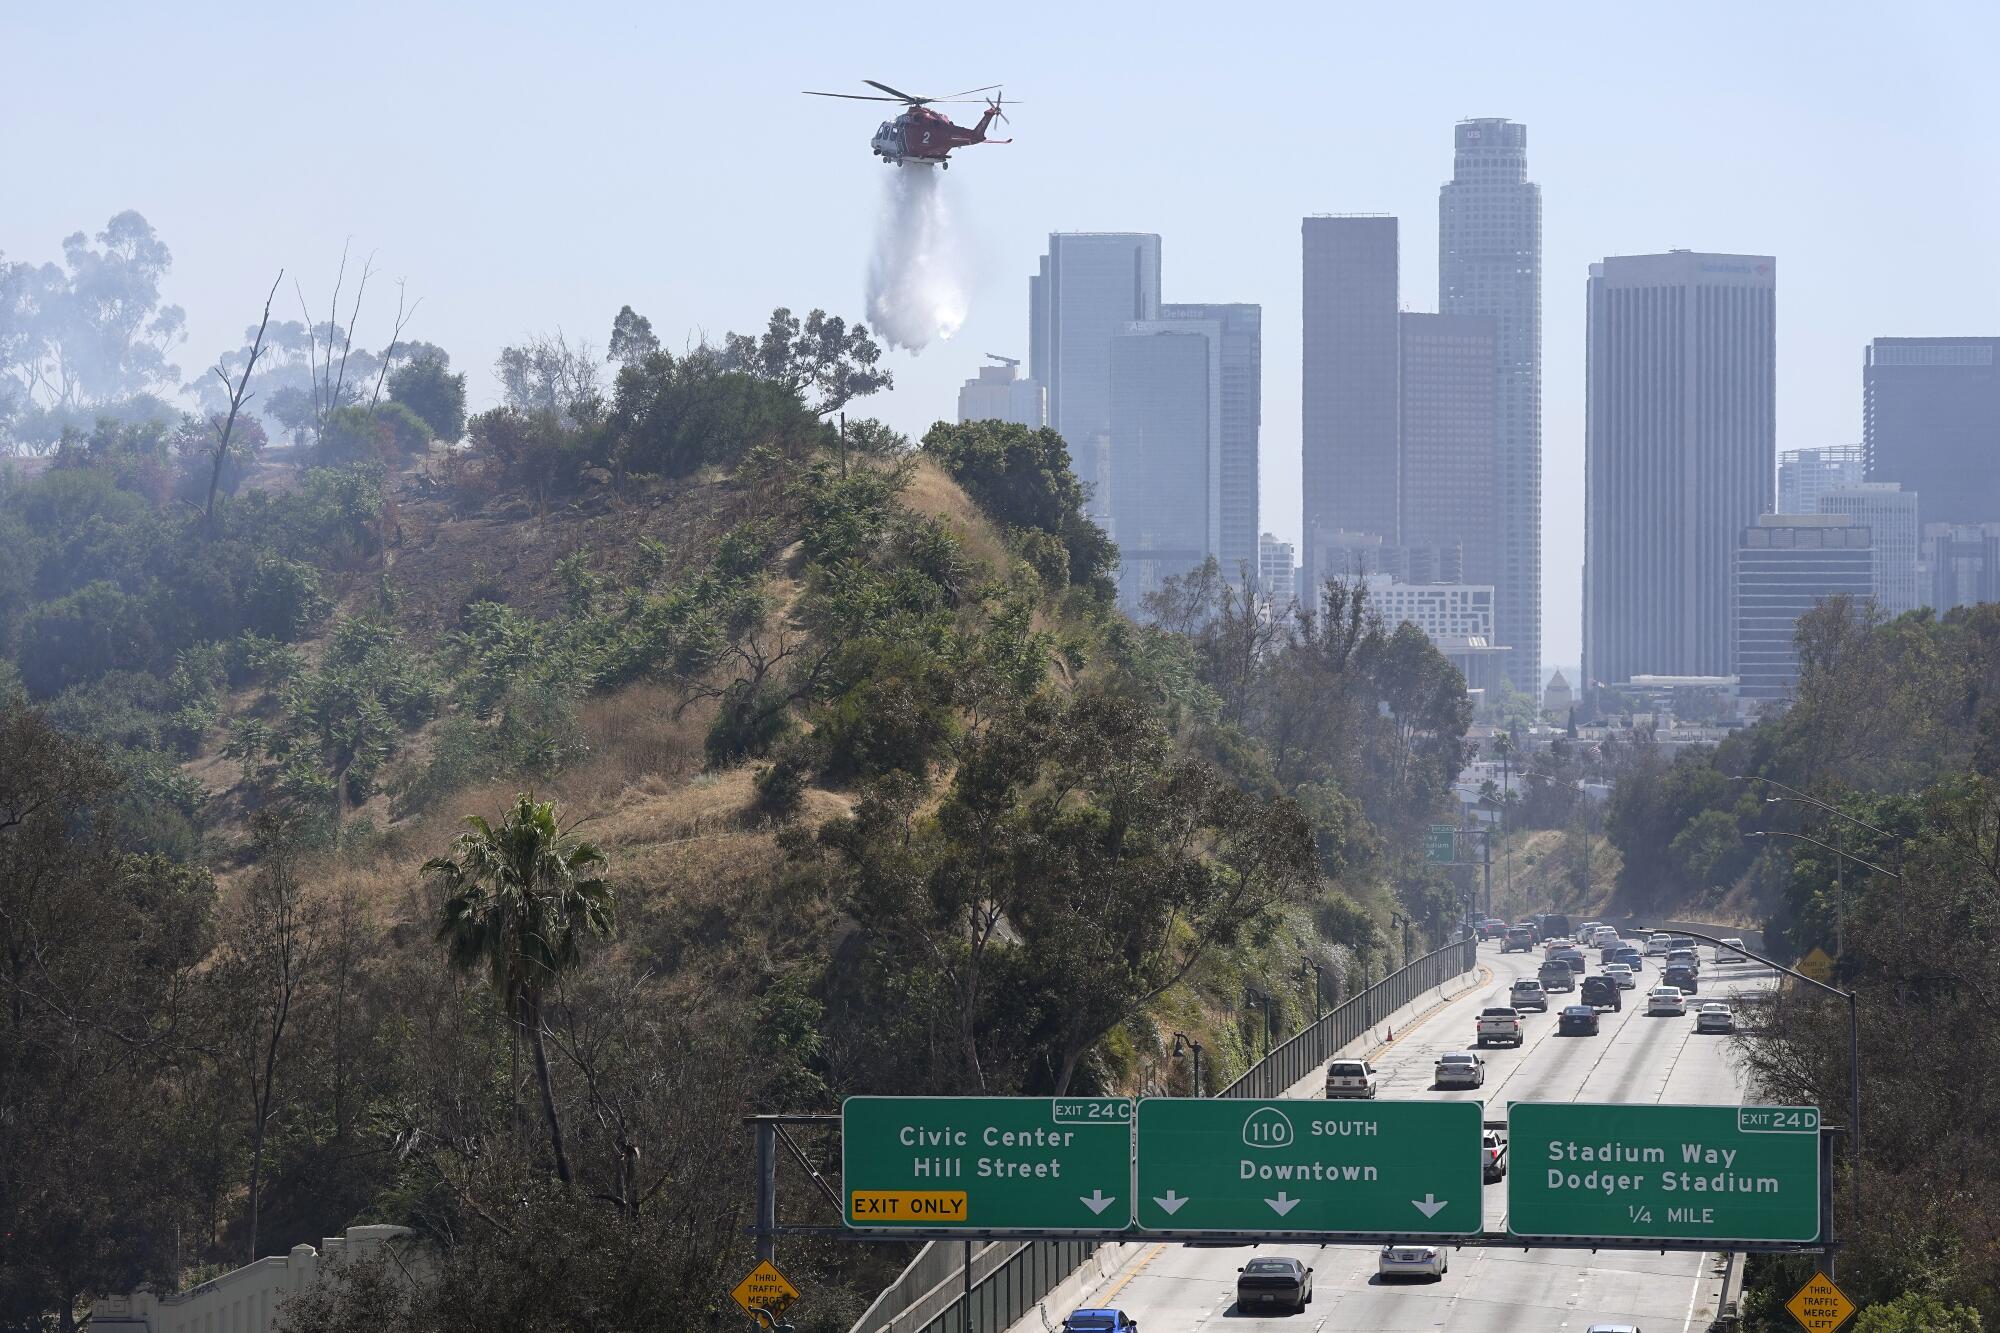 A helicopter drops water on a hillside against a backdrop of skyscrapers, near freeway signs for the 110 South to Downtown.